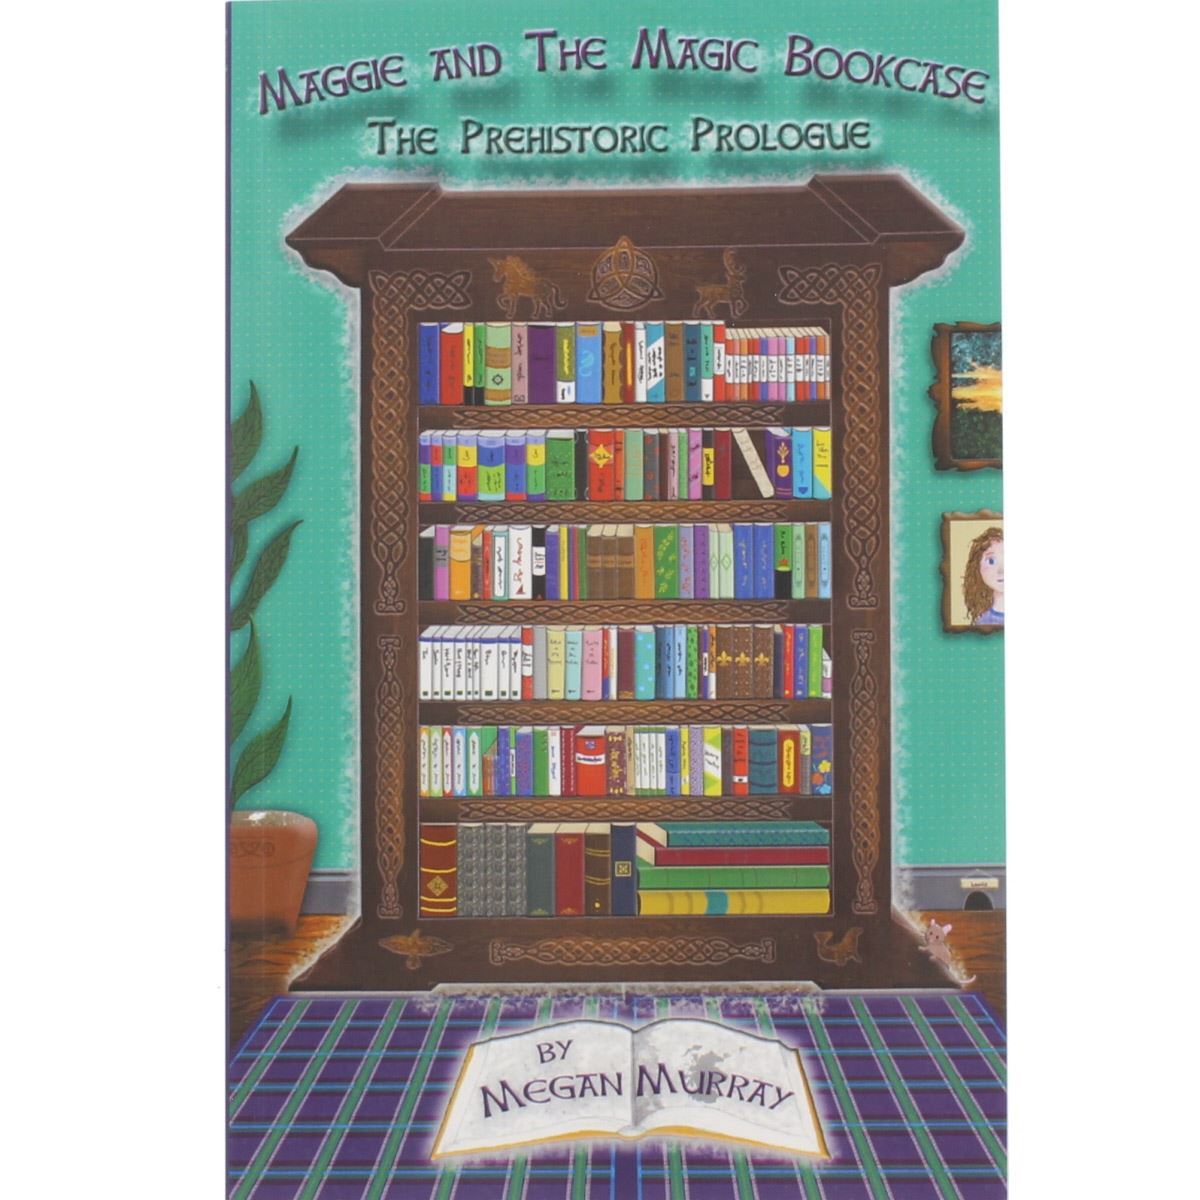 maggie-and-the-magic-bookcase-the-prehistoric-prologue